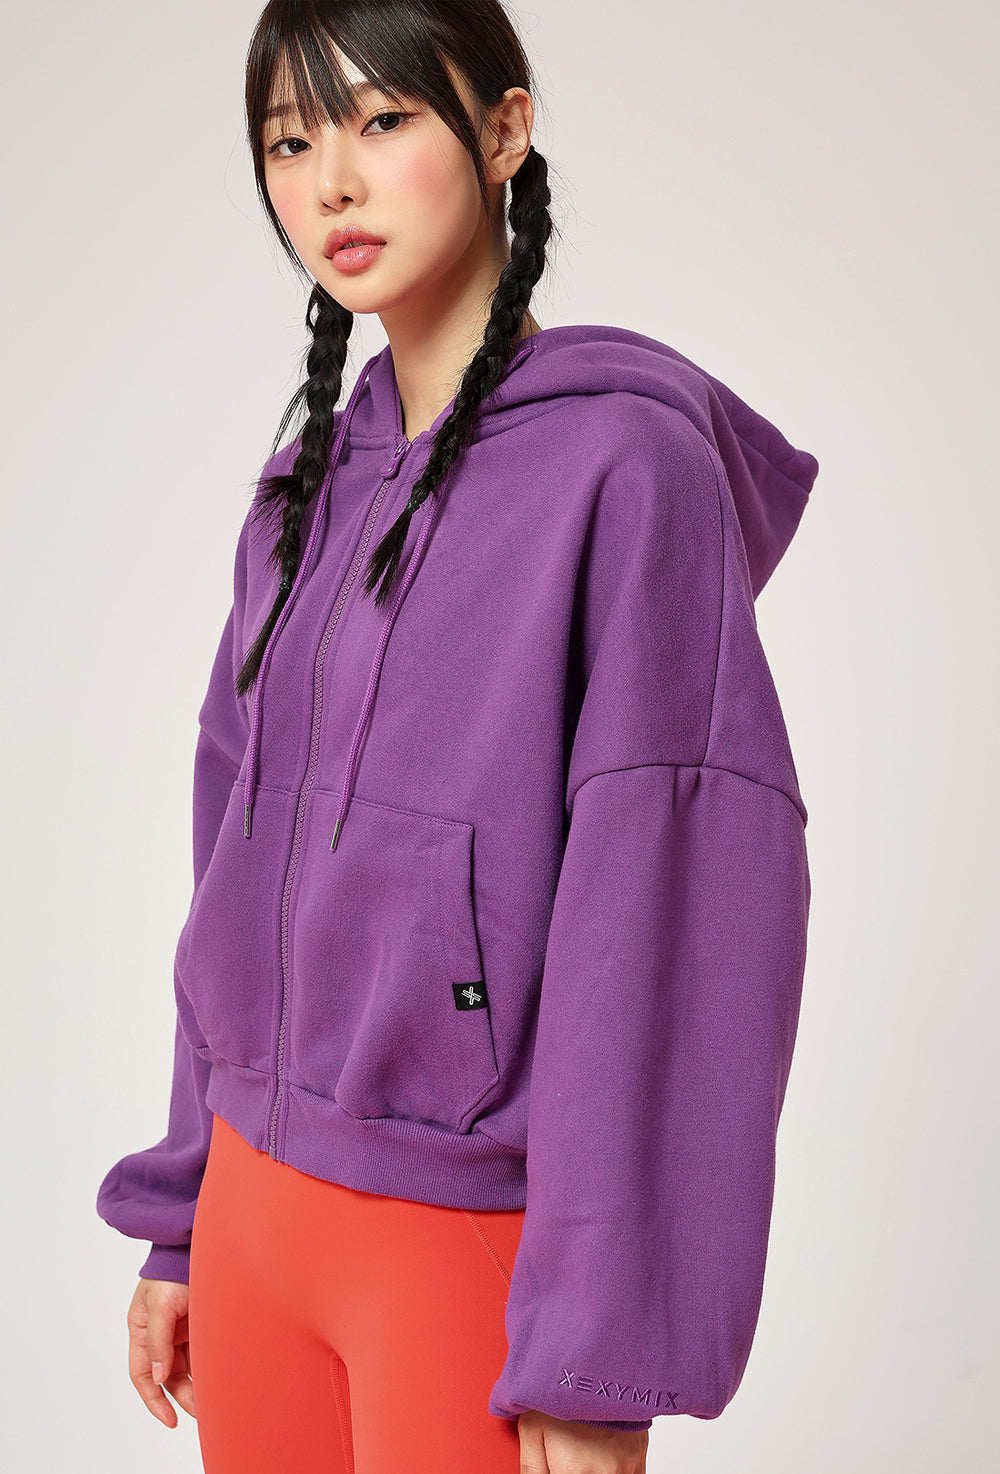 Napping Hood Zip-up - Iris Orchid